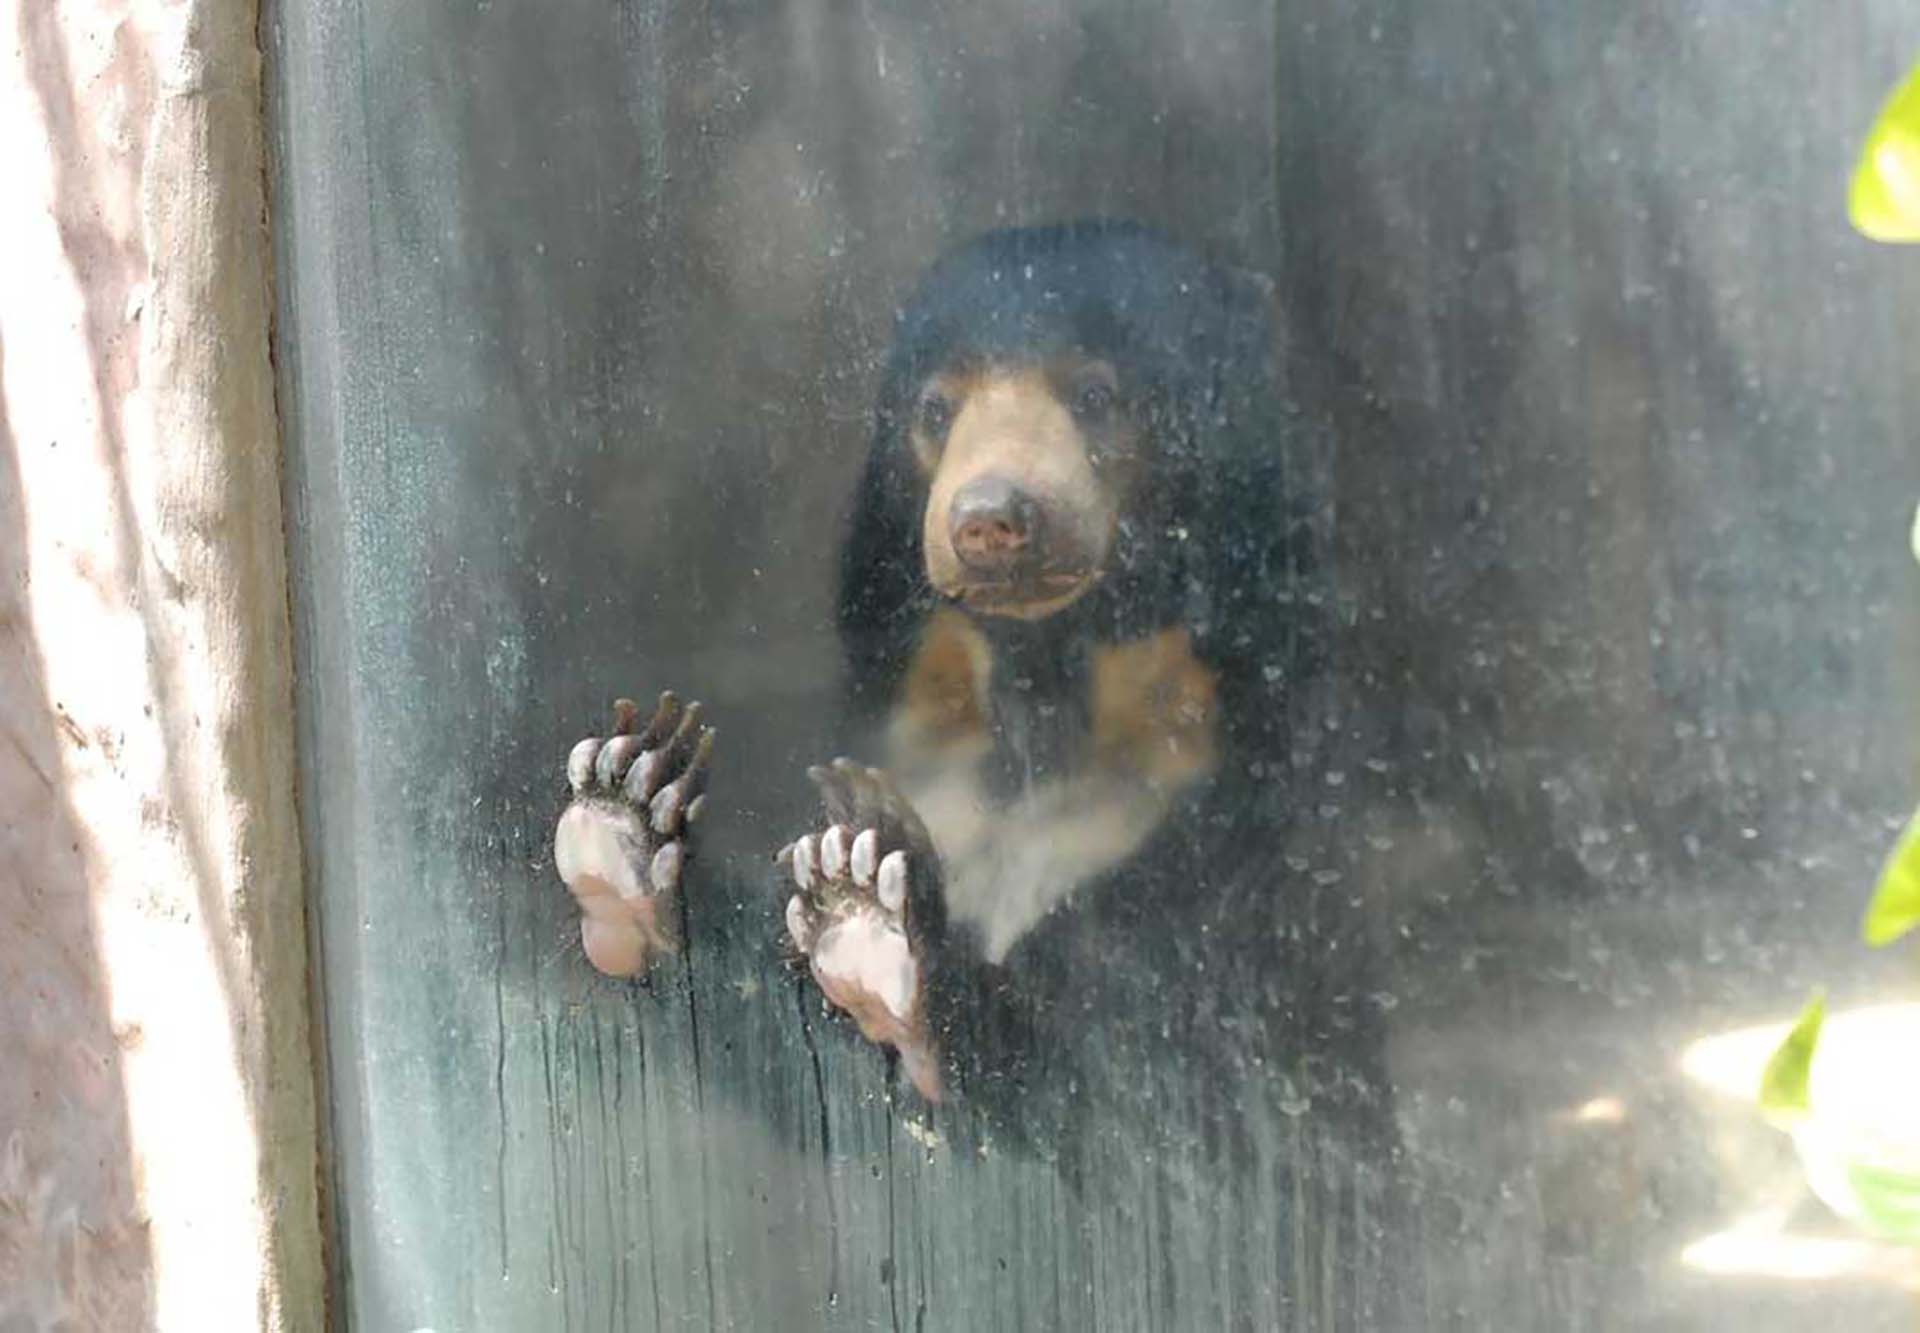 Bear at the Pata zoo looking out of the glass.